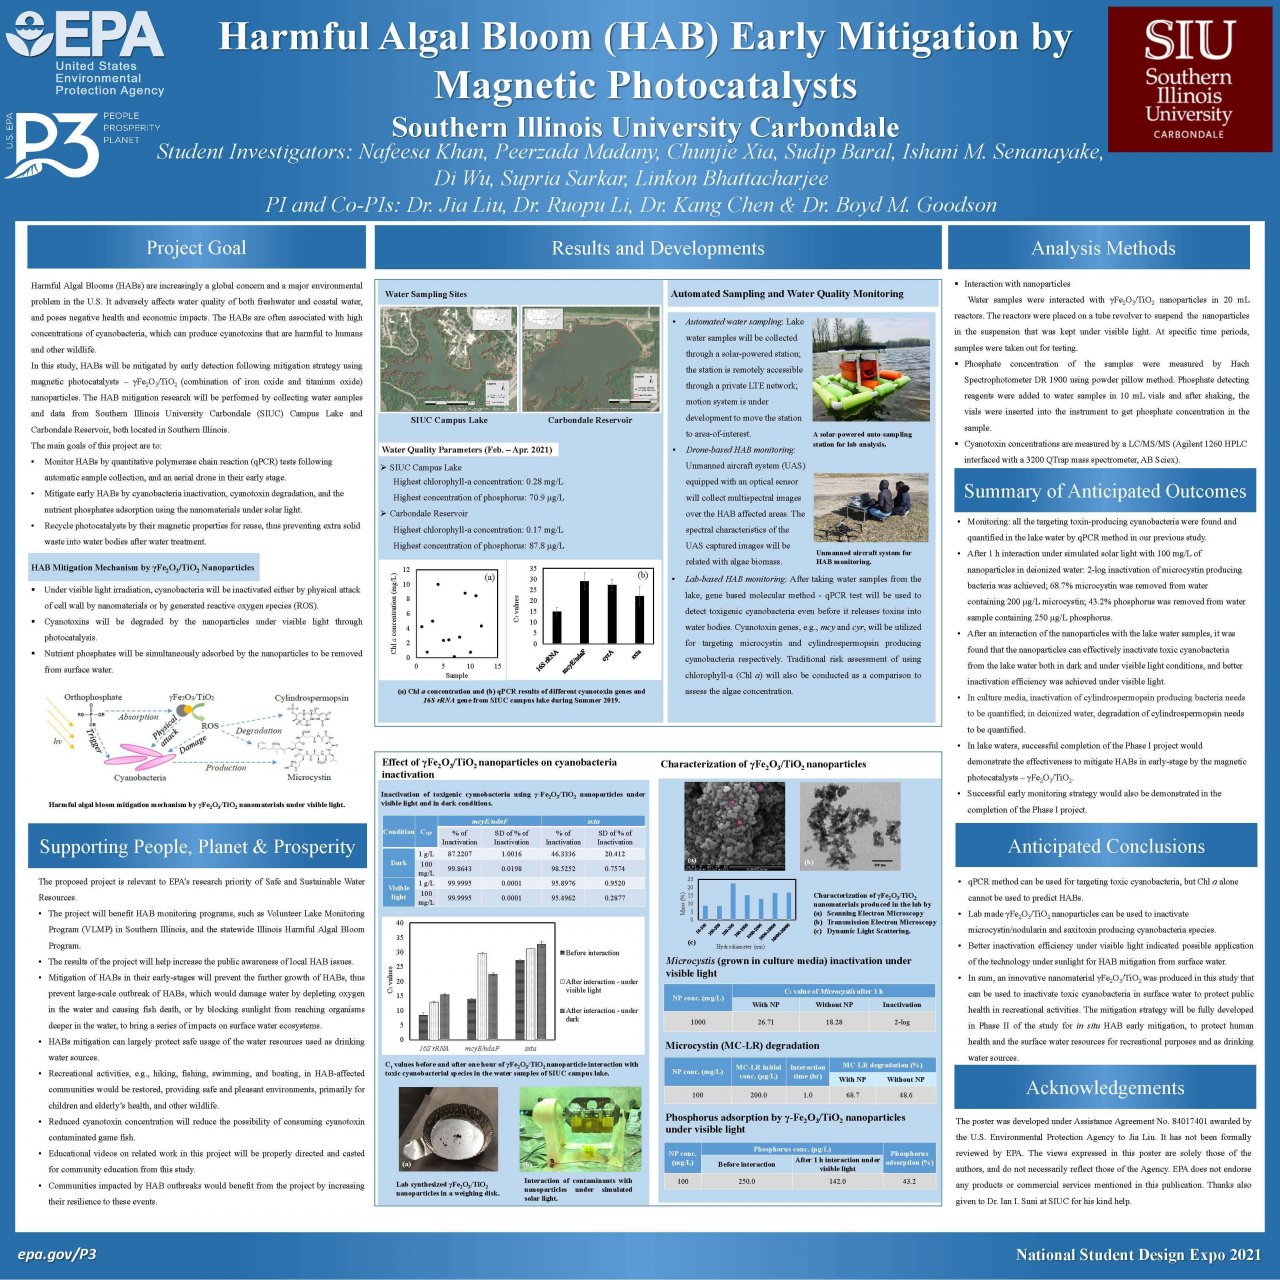 2021 P3 Expo - HAB Early Mitigation by Magnetic Photocatalysts | US EPA